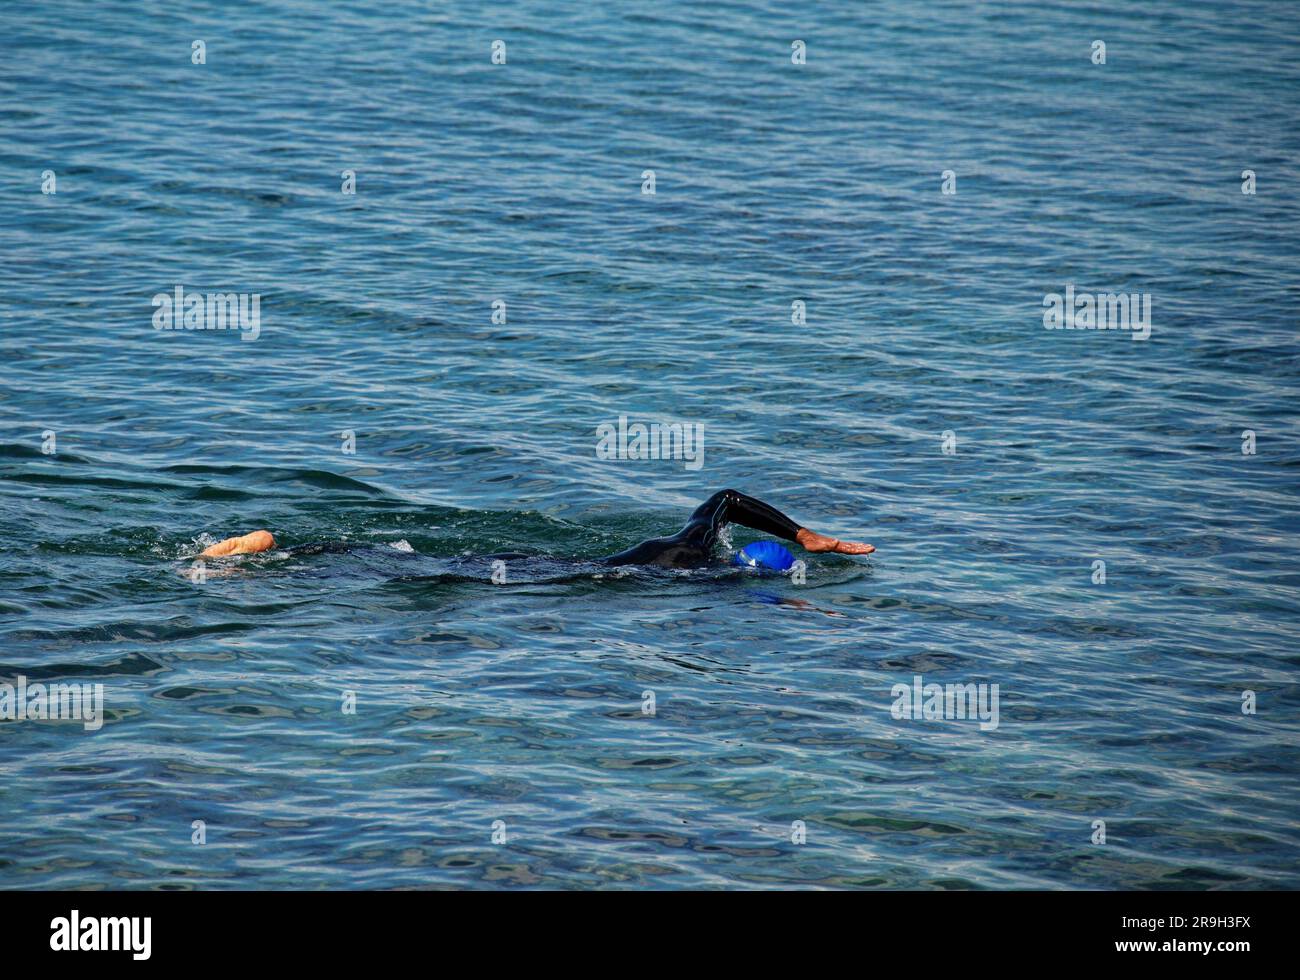 Male marathon swimmer in action during training Stock Photo